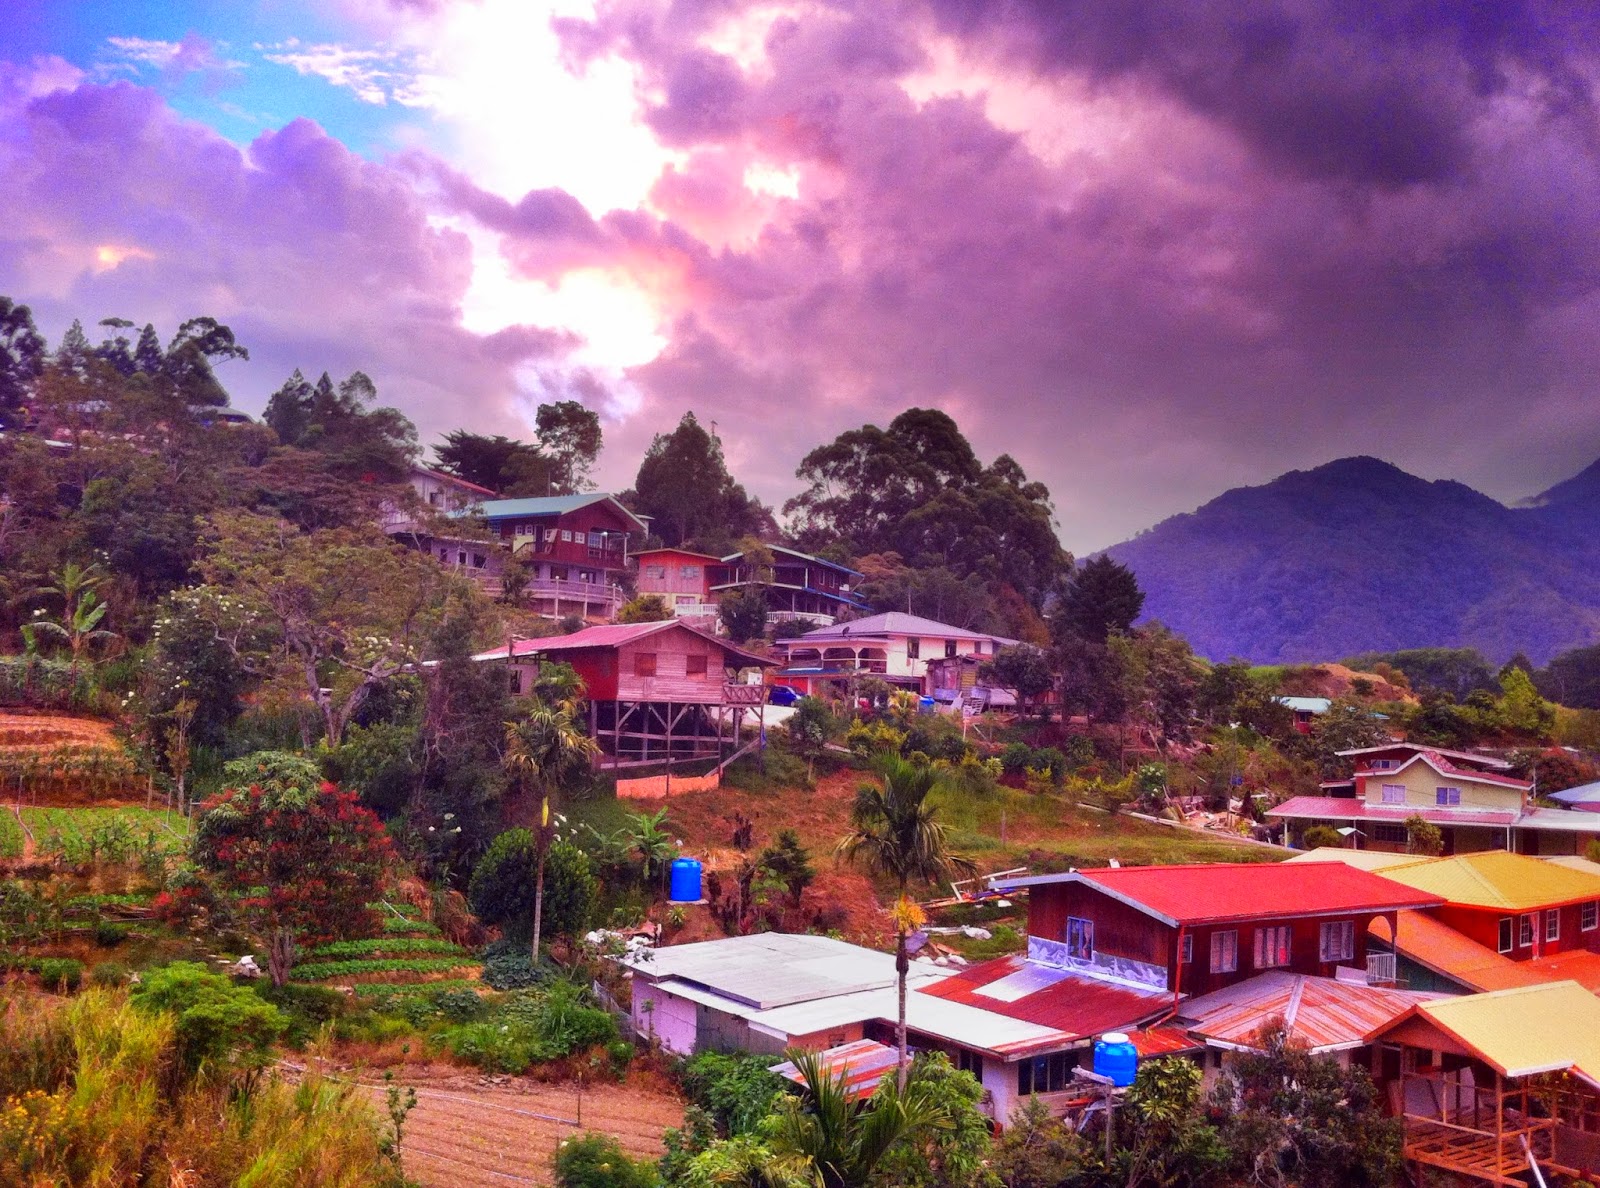 Everything About Wood: View of a farming village at Kundasang